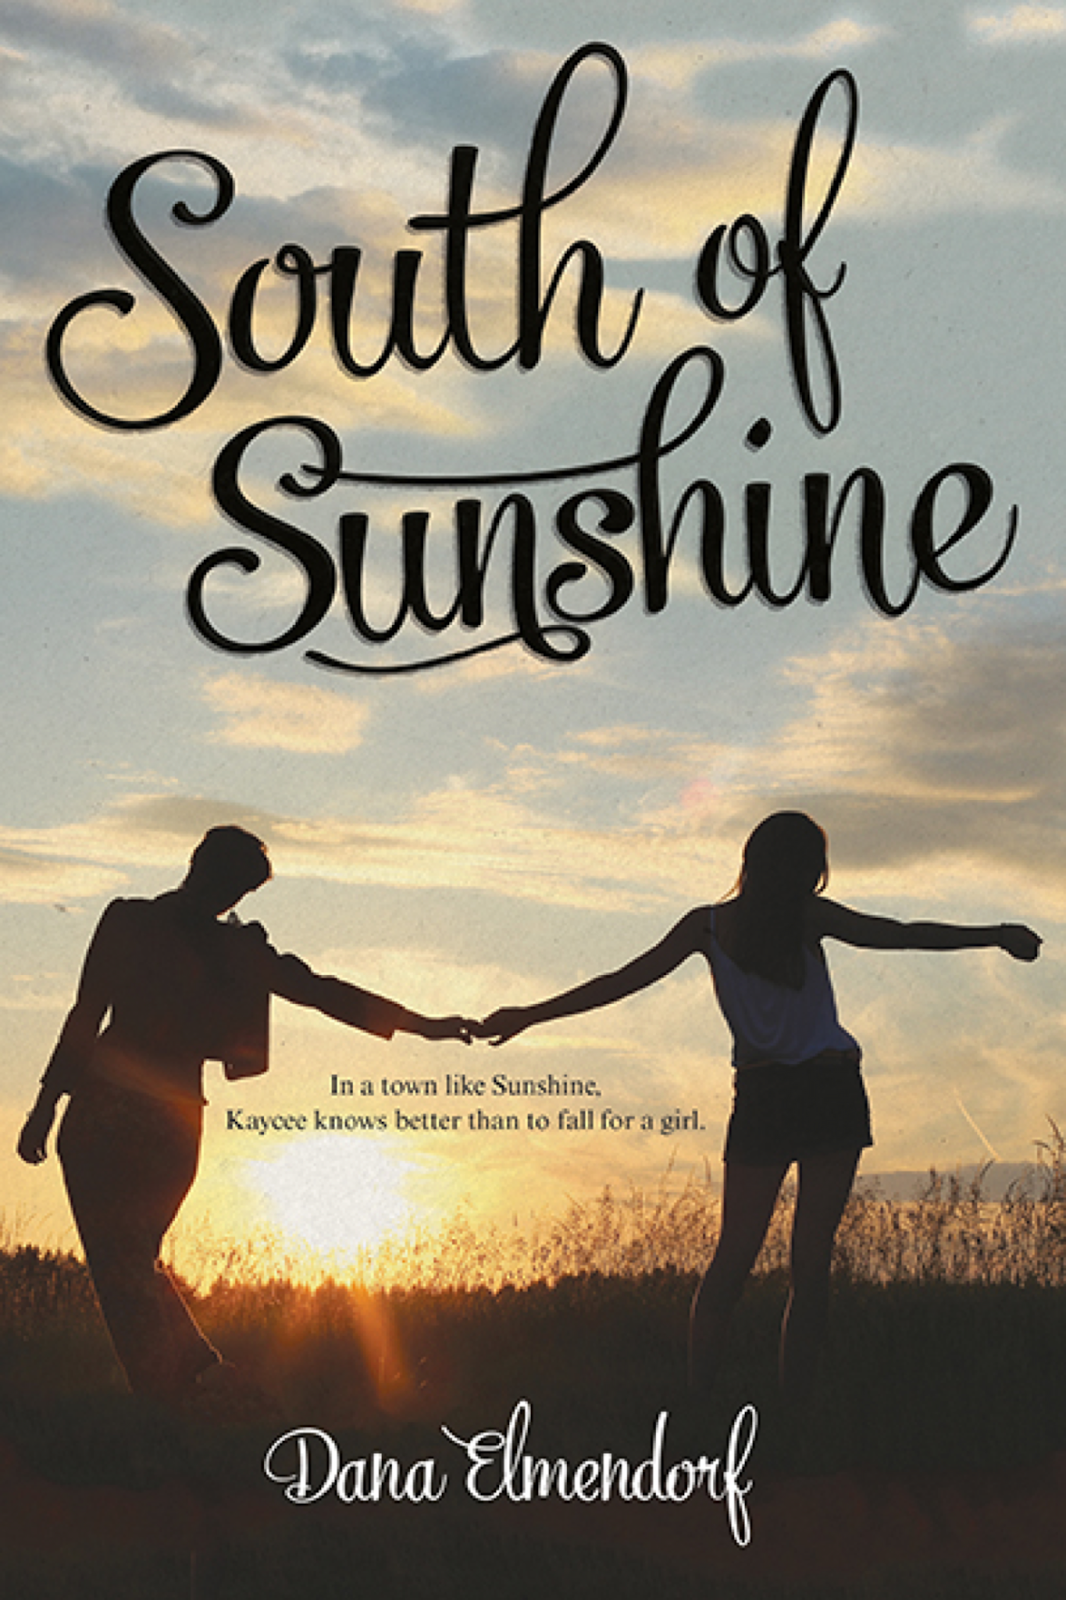 South of Sunshine cover